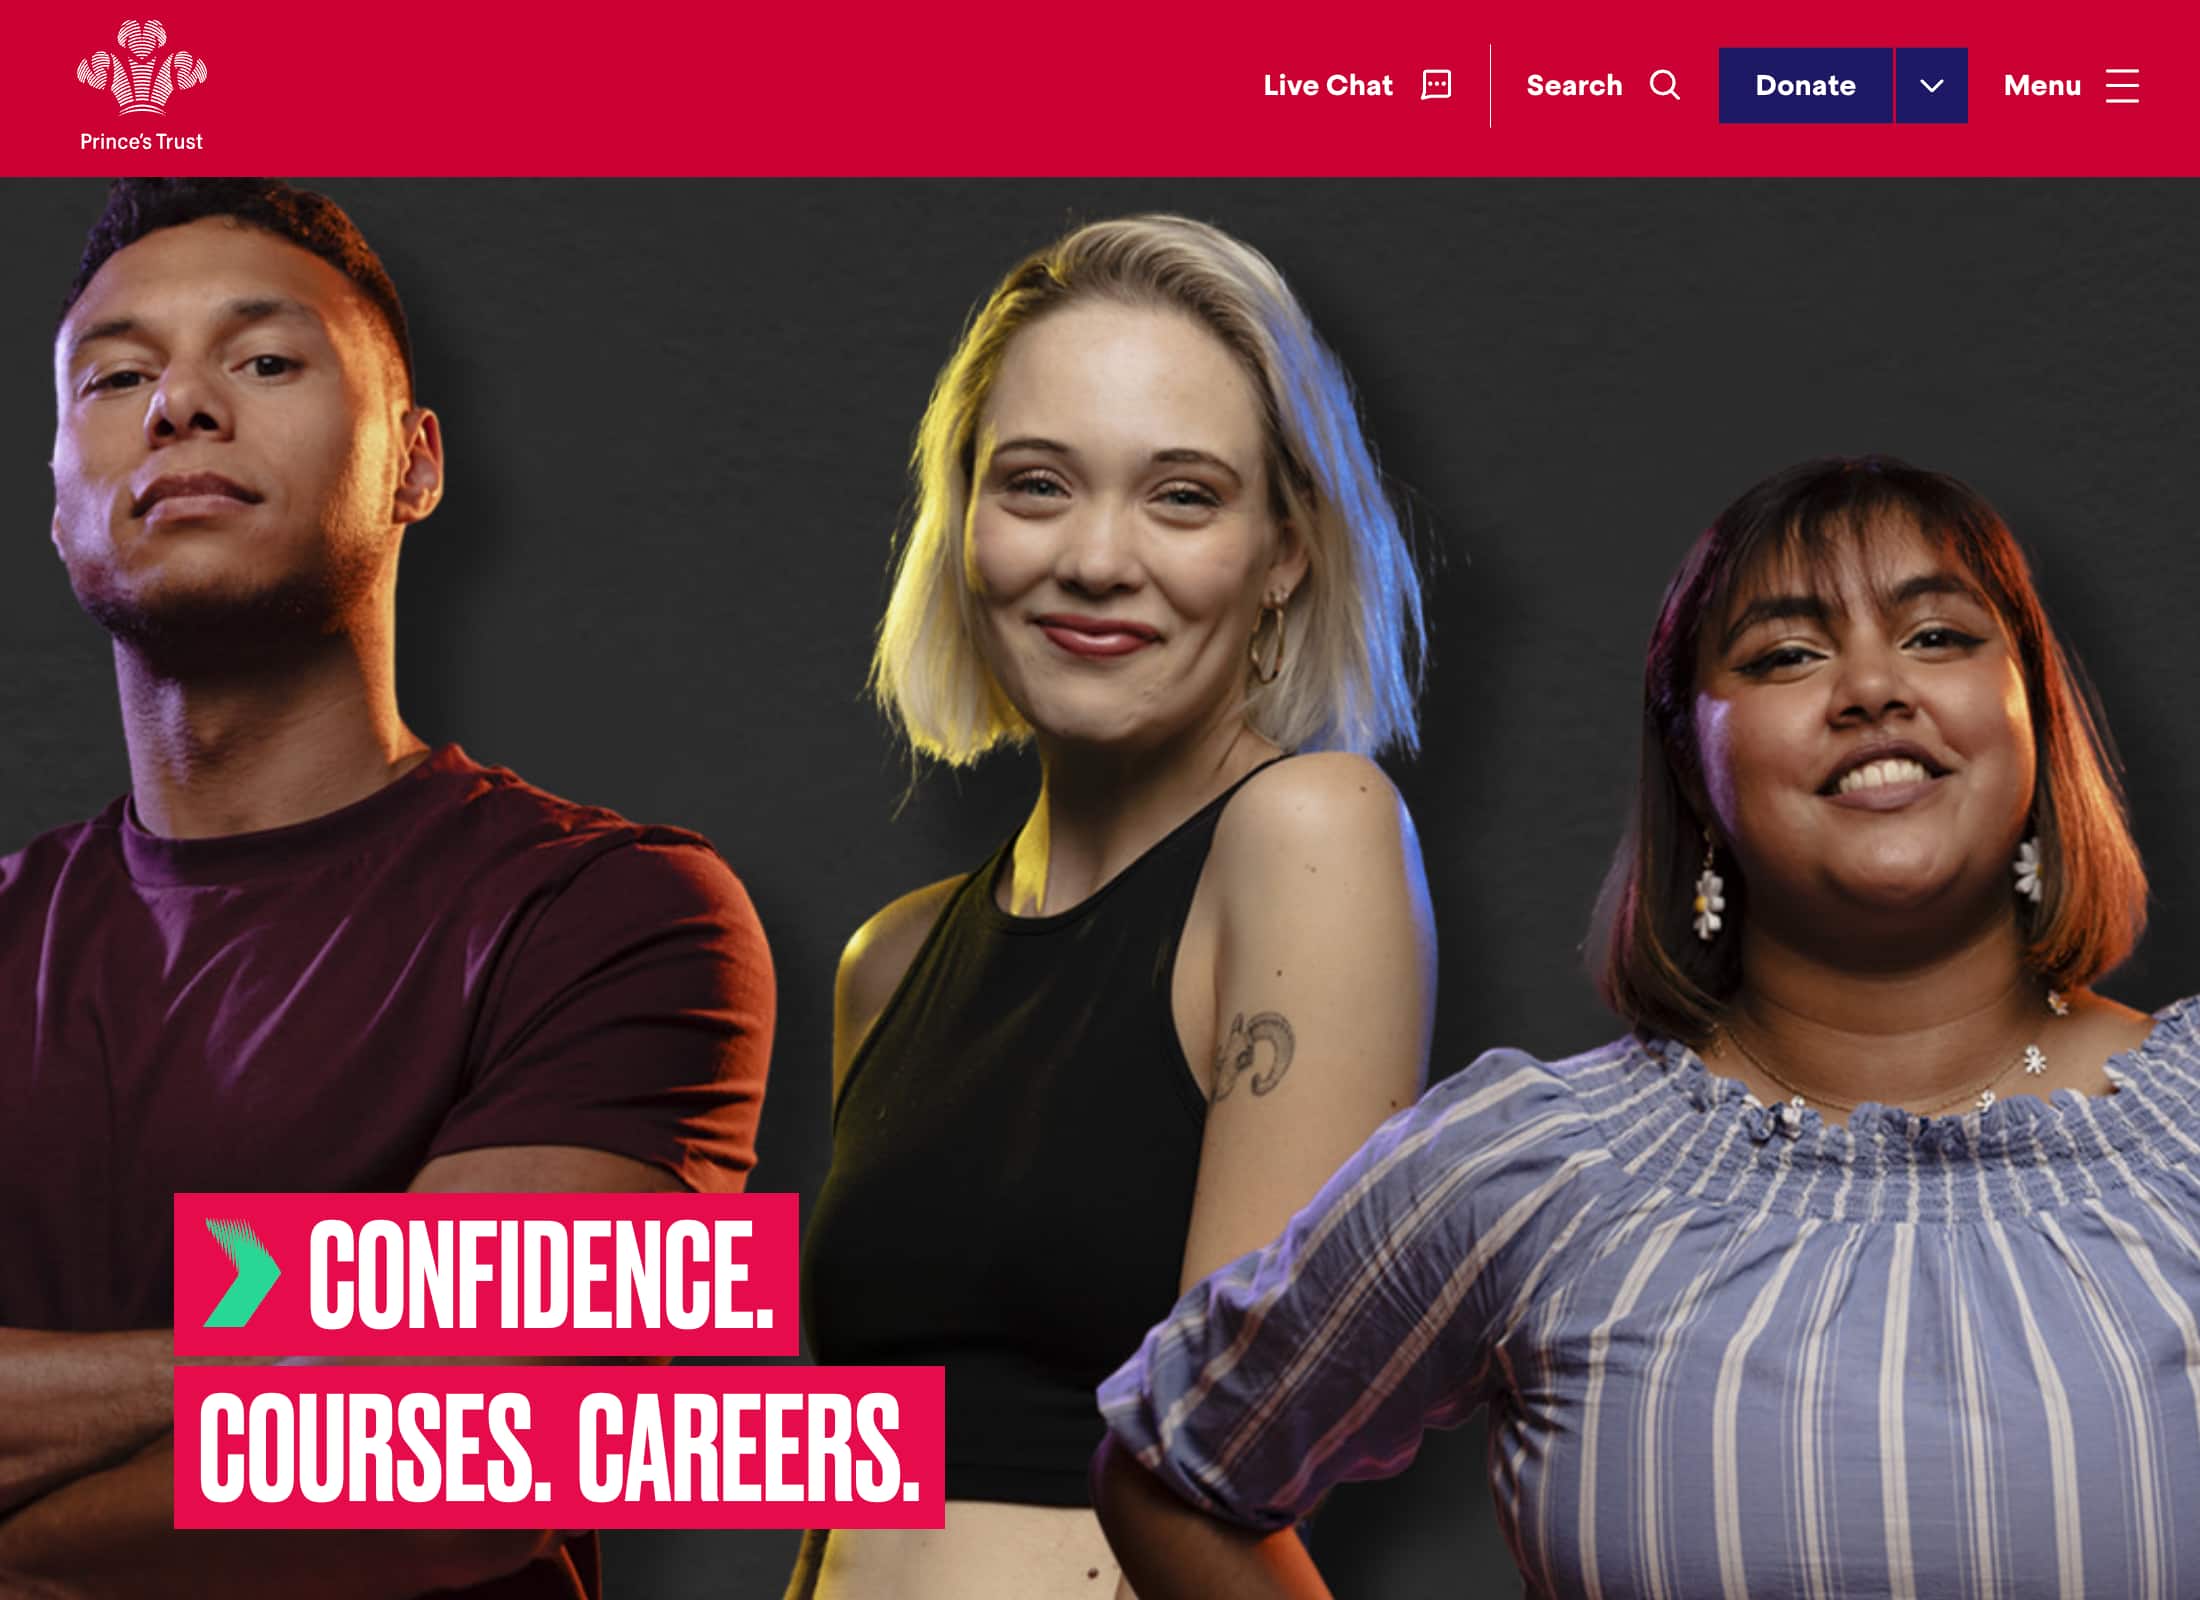 Screenshot showing The Prince's Trust homepage